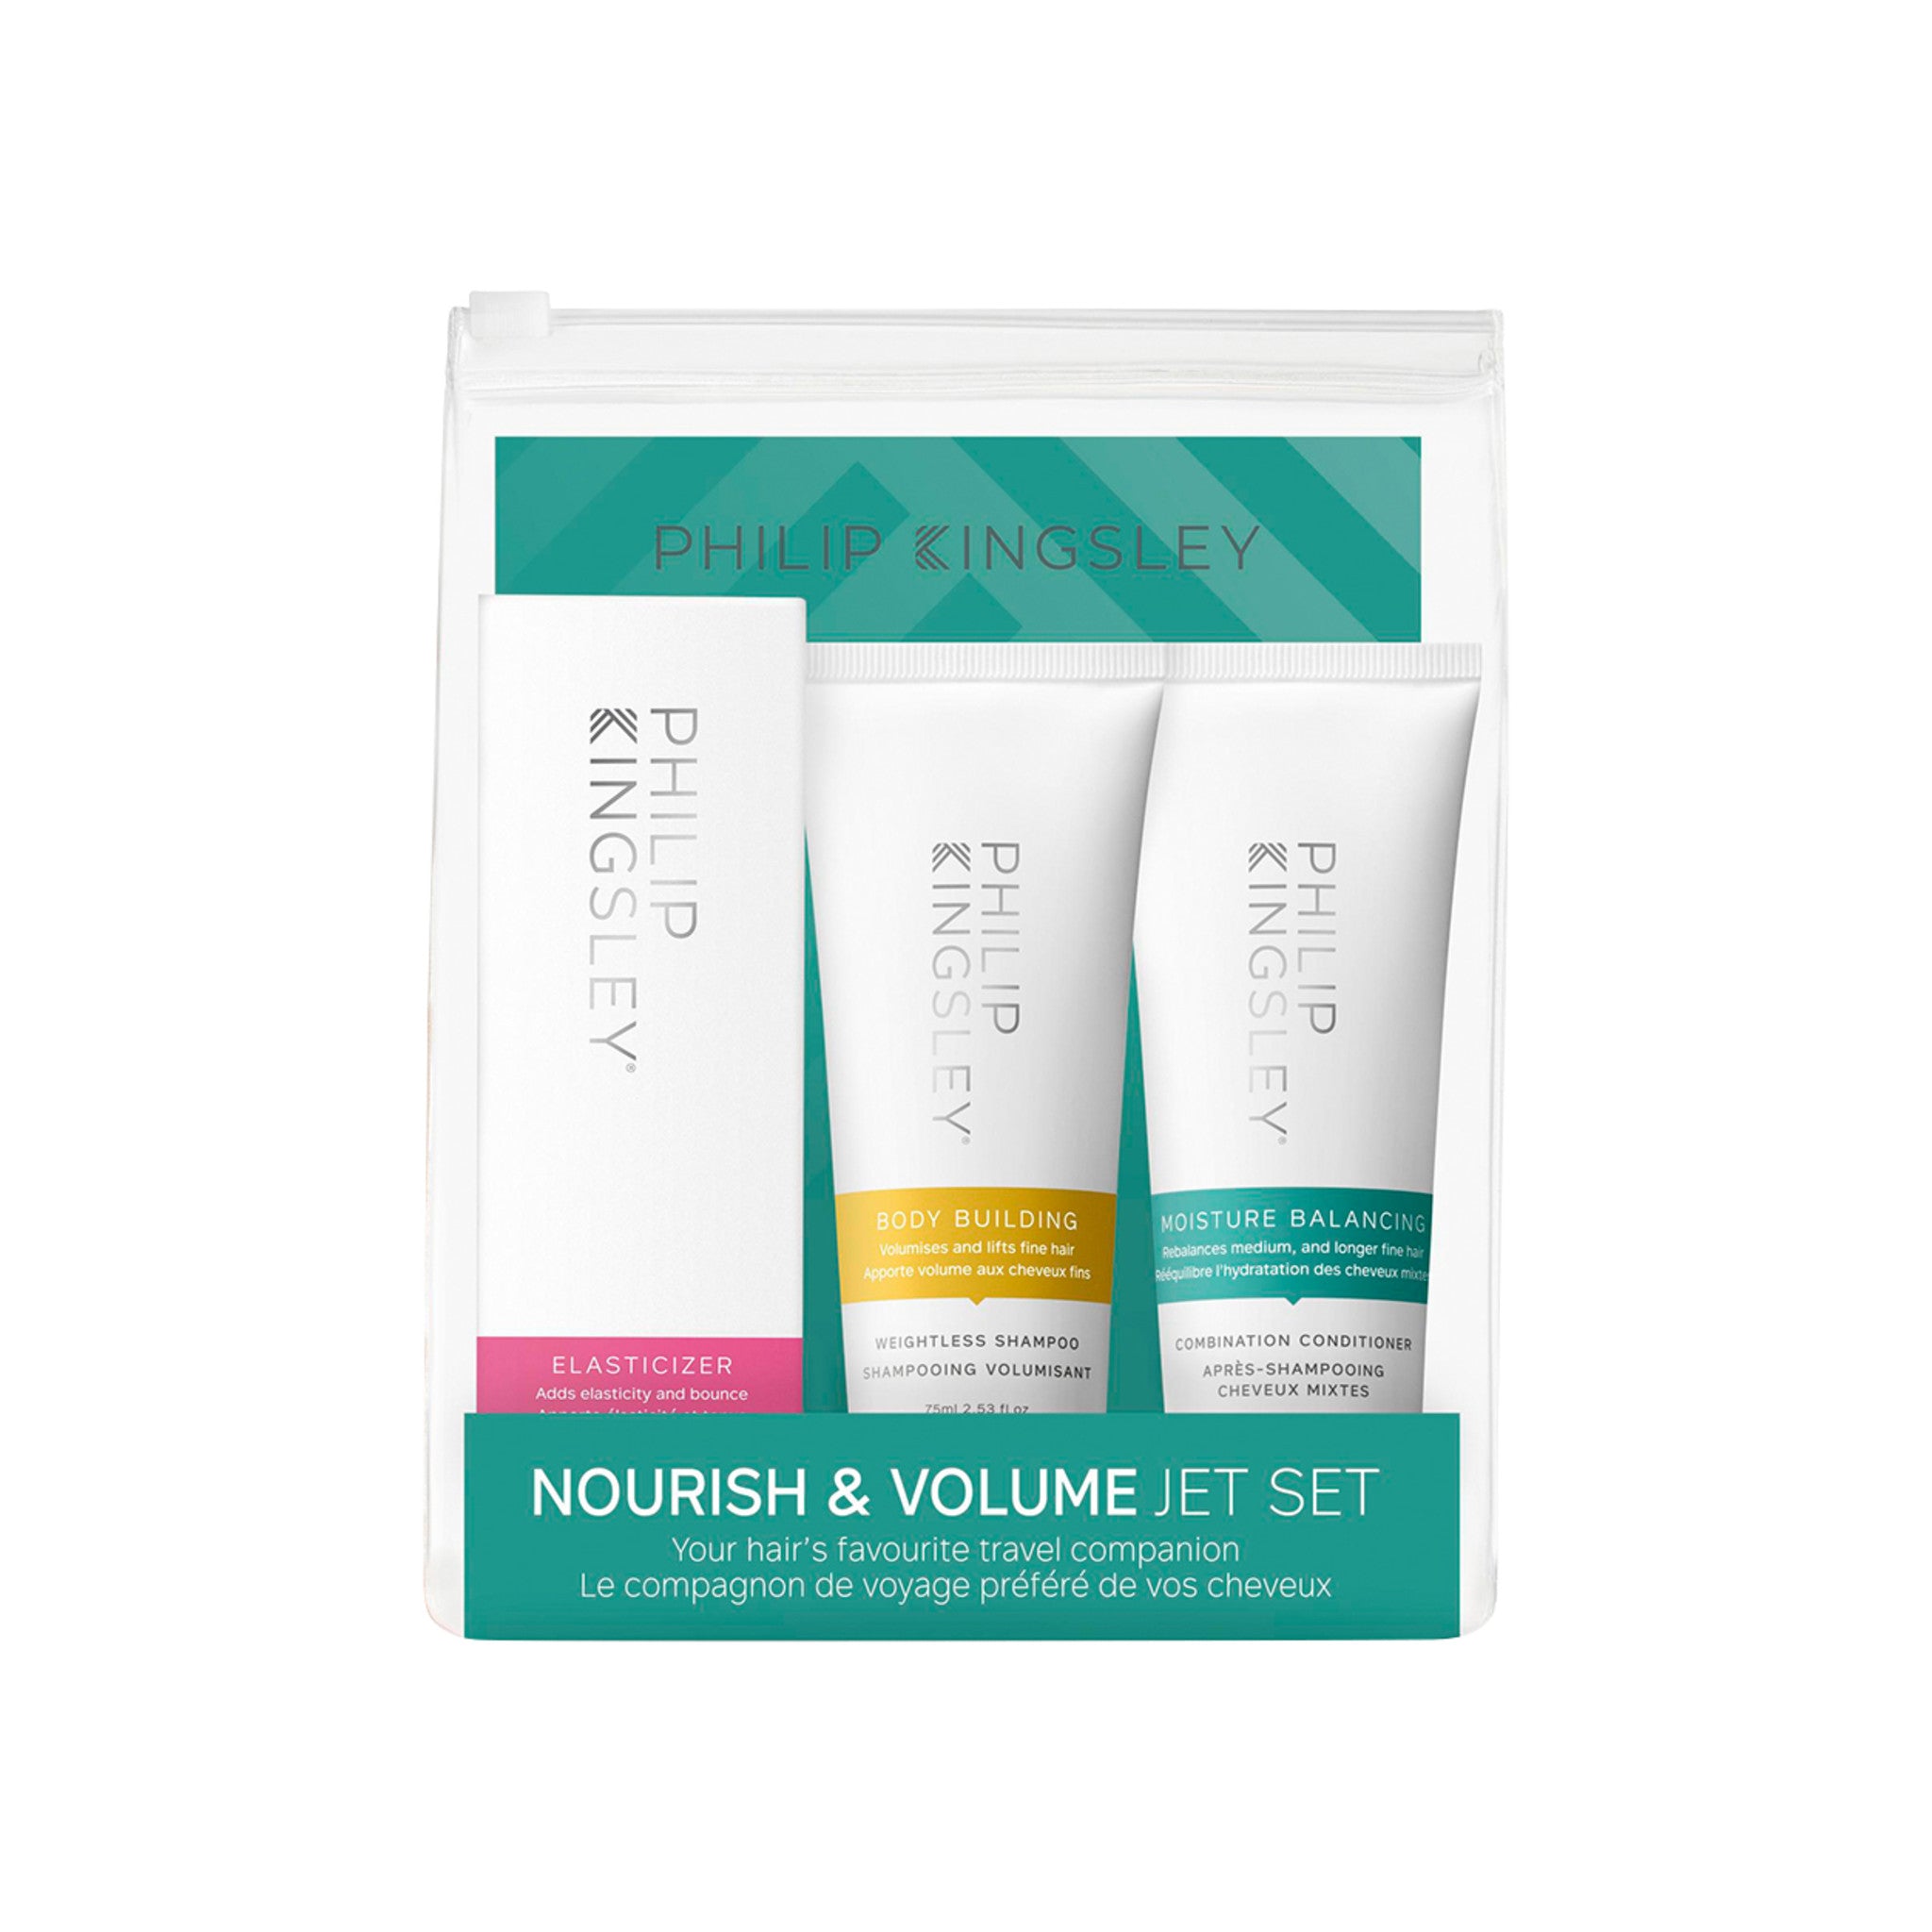 Philip Kingsley Nourish and Volume Jet Set Collection main image.